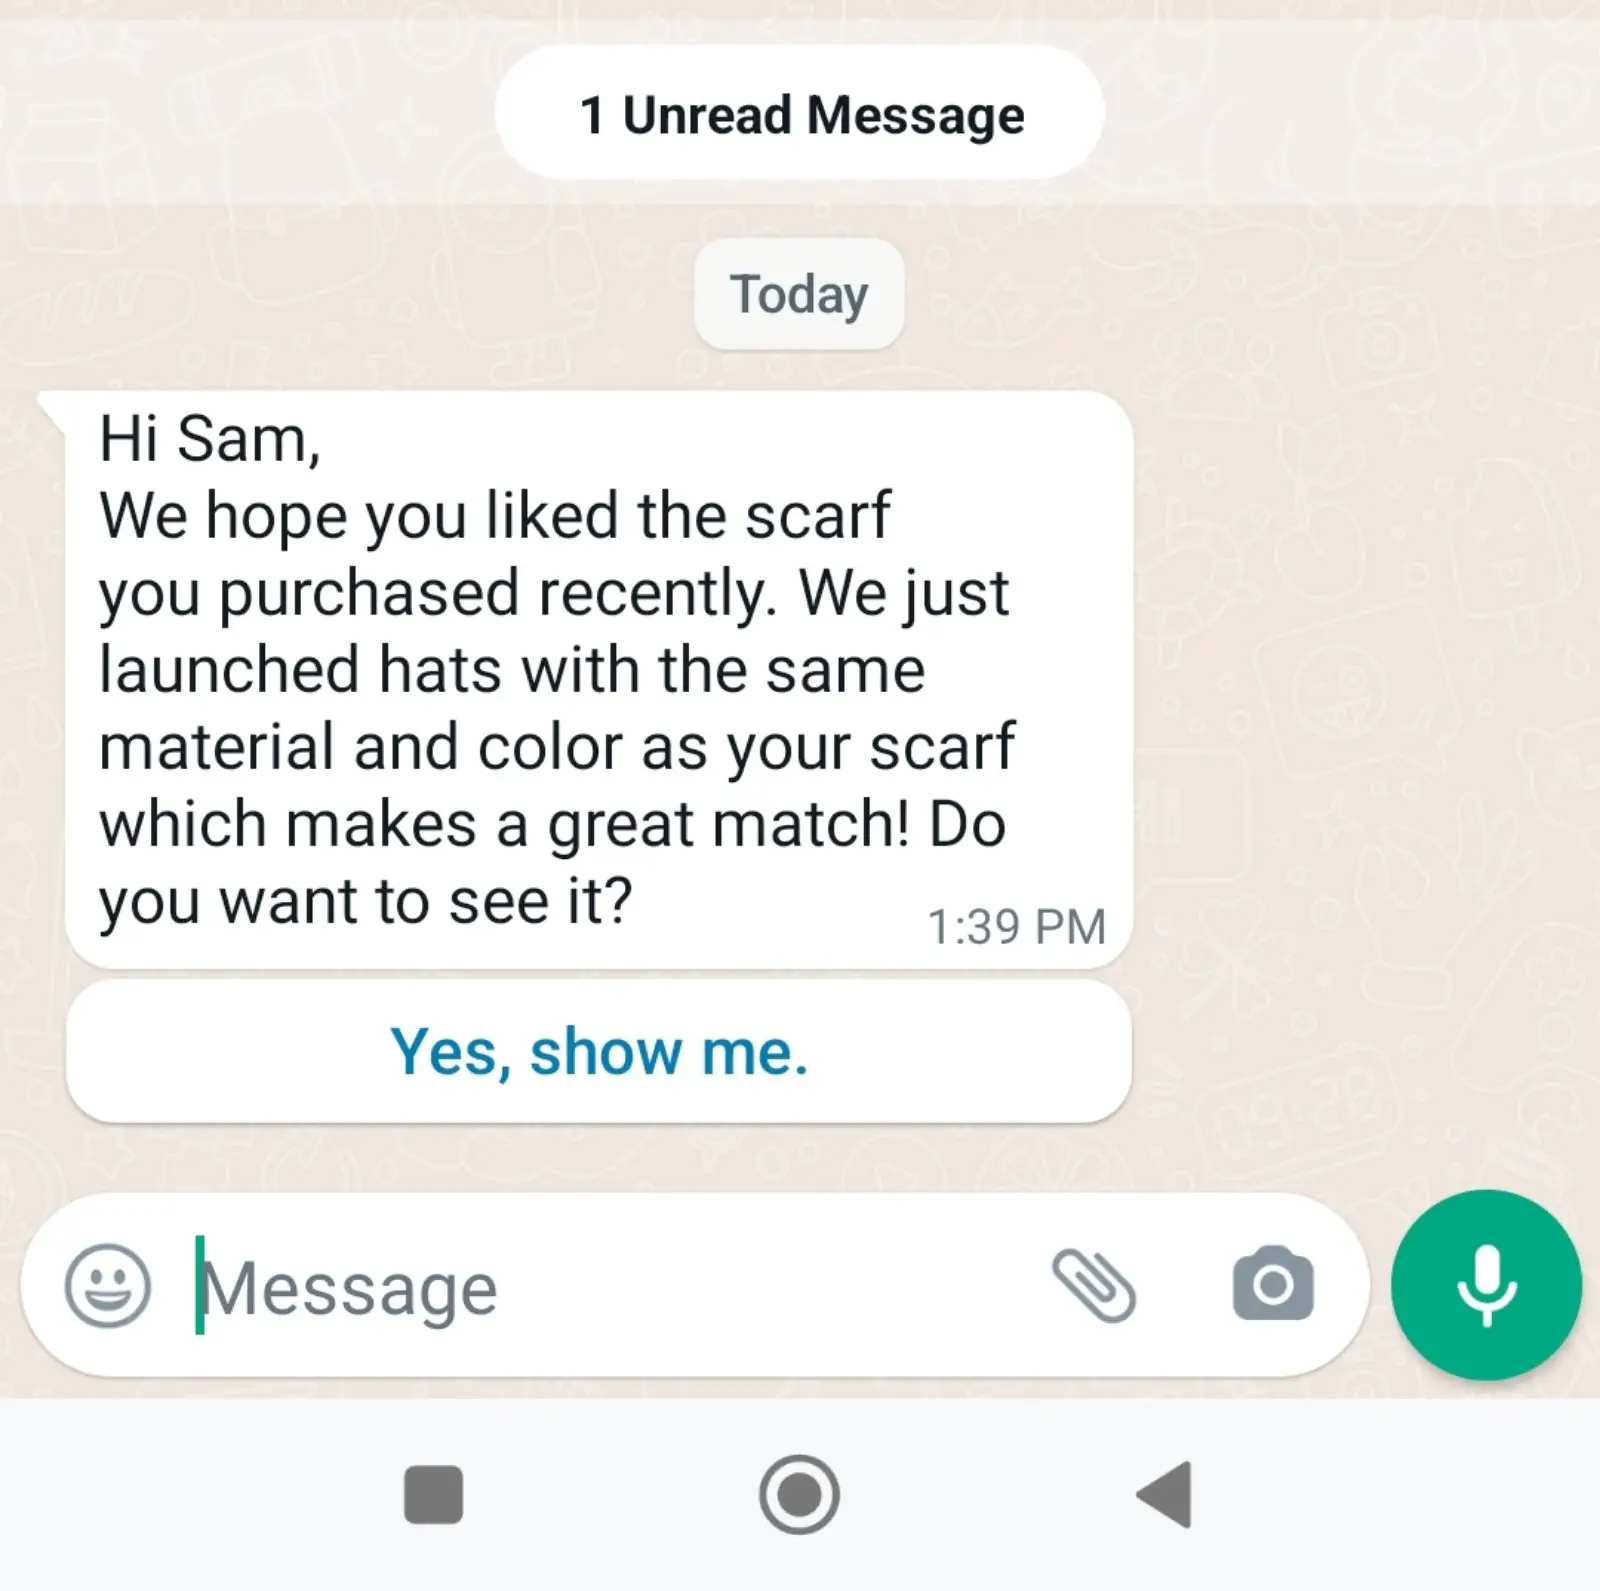 WhatsApp message targeting customers post-purchase